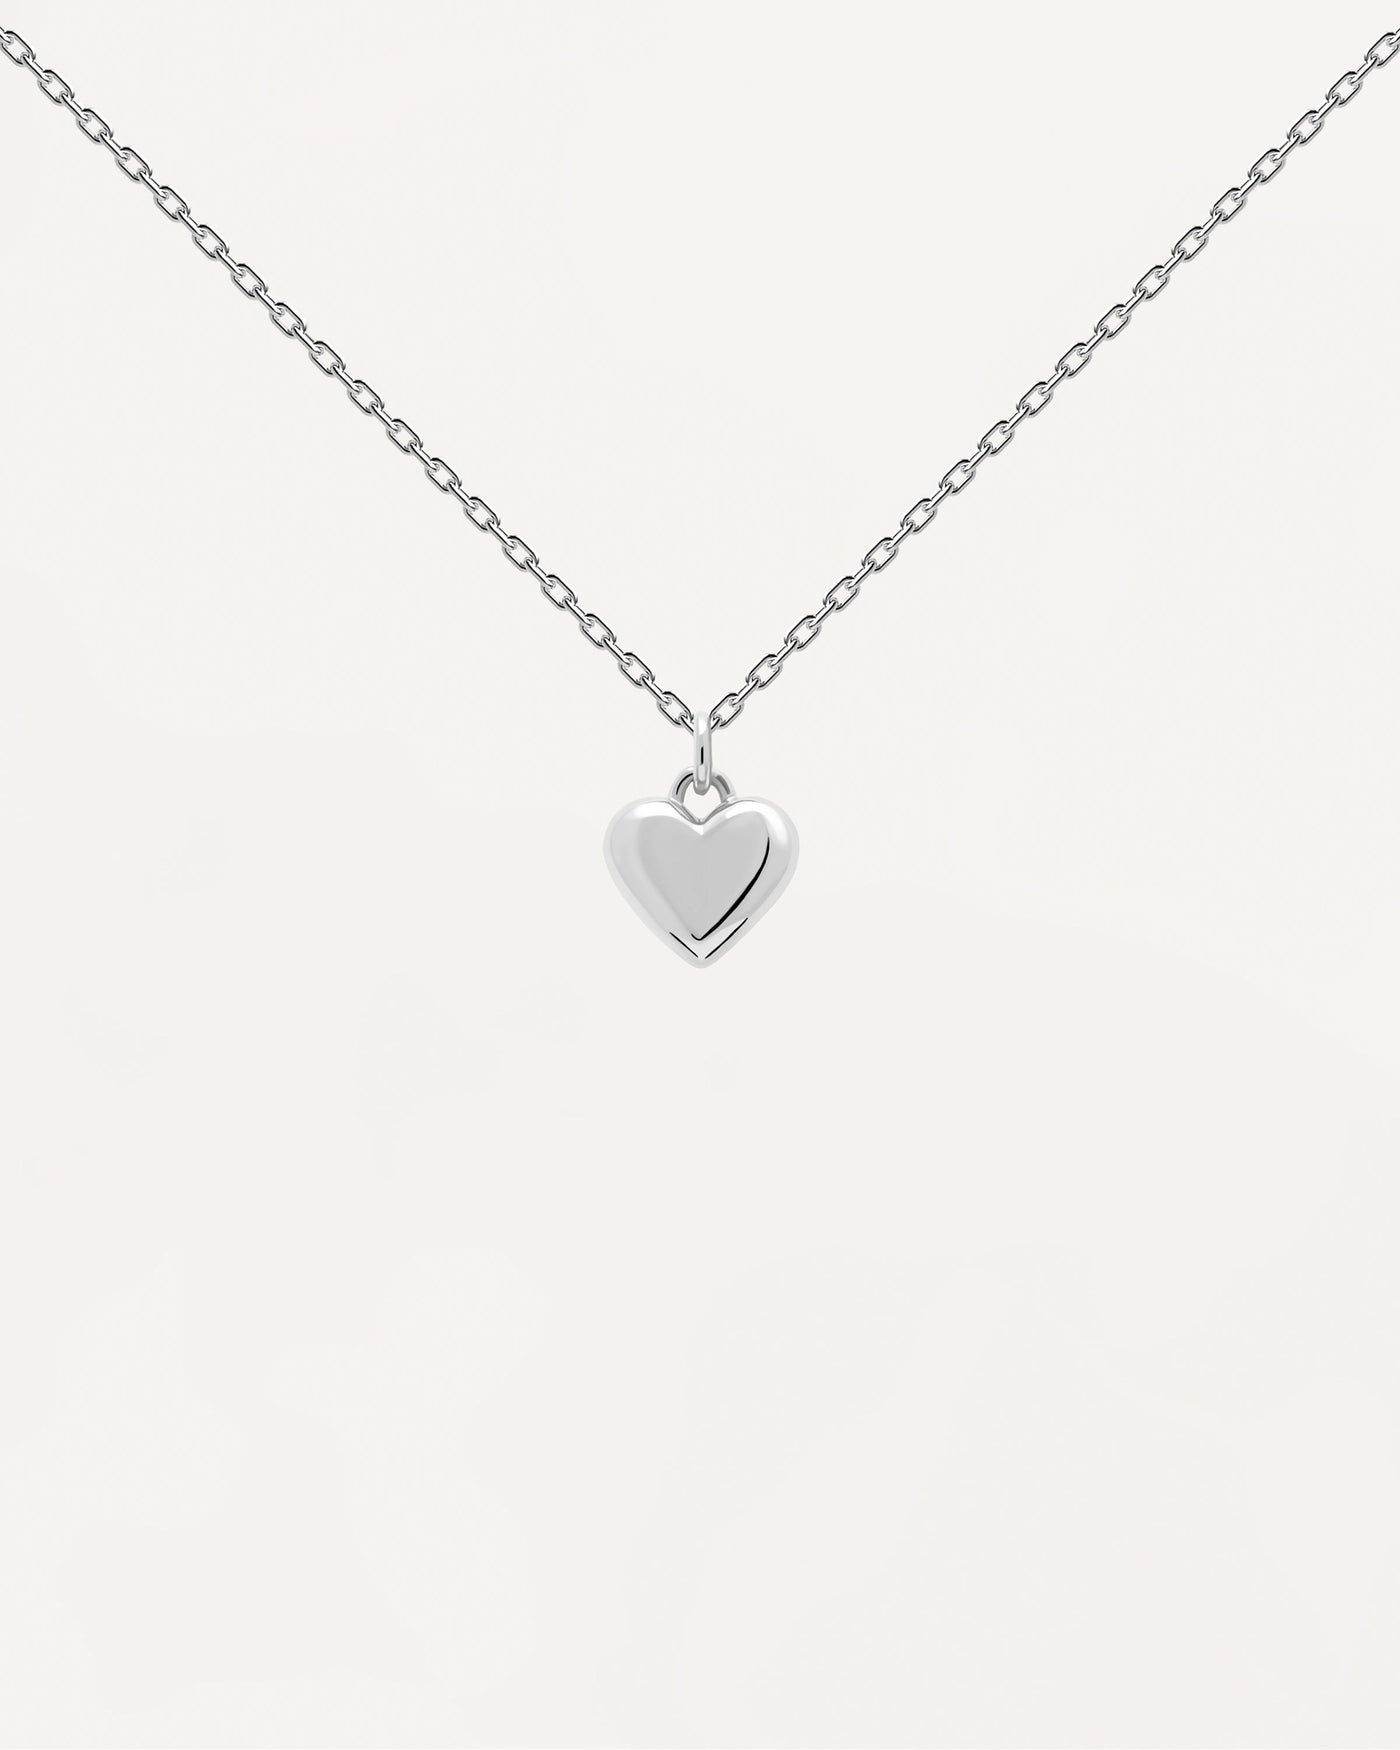 2023 Selection | L'Absolu Silver Necklace. 925 silver necklace with engravable heart pendant to customize. Get the latest arrival from PDPAOLA. Place your order safely and get this Best Seller. Free Shipping.